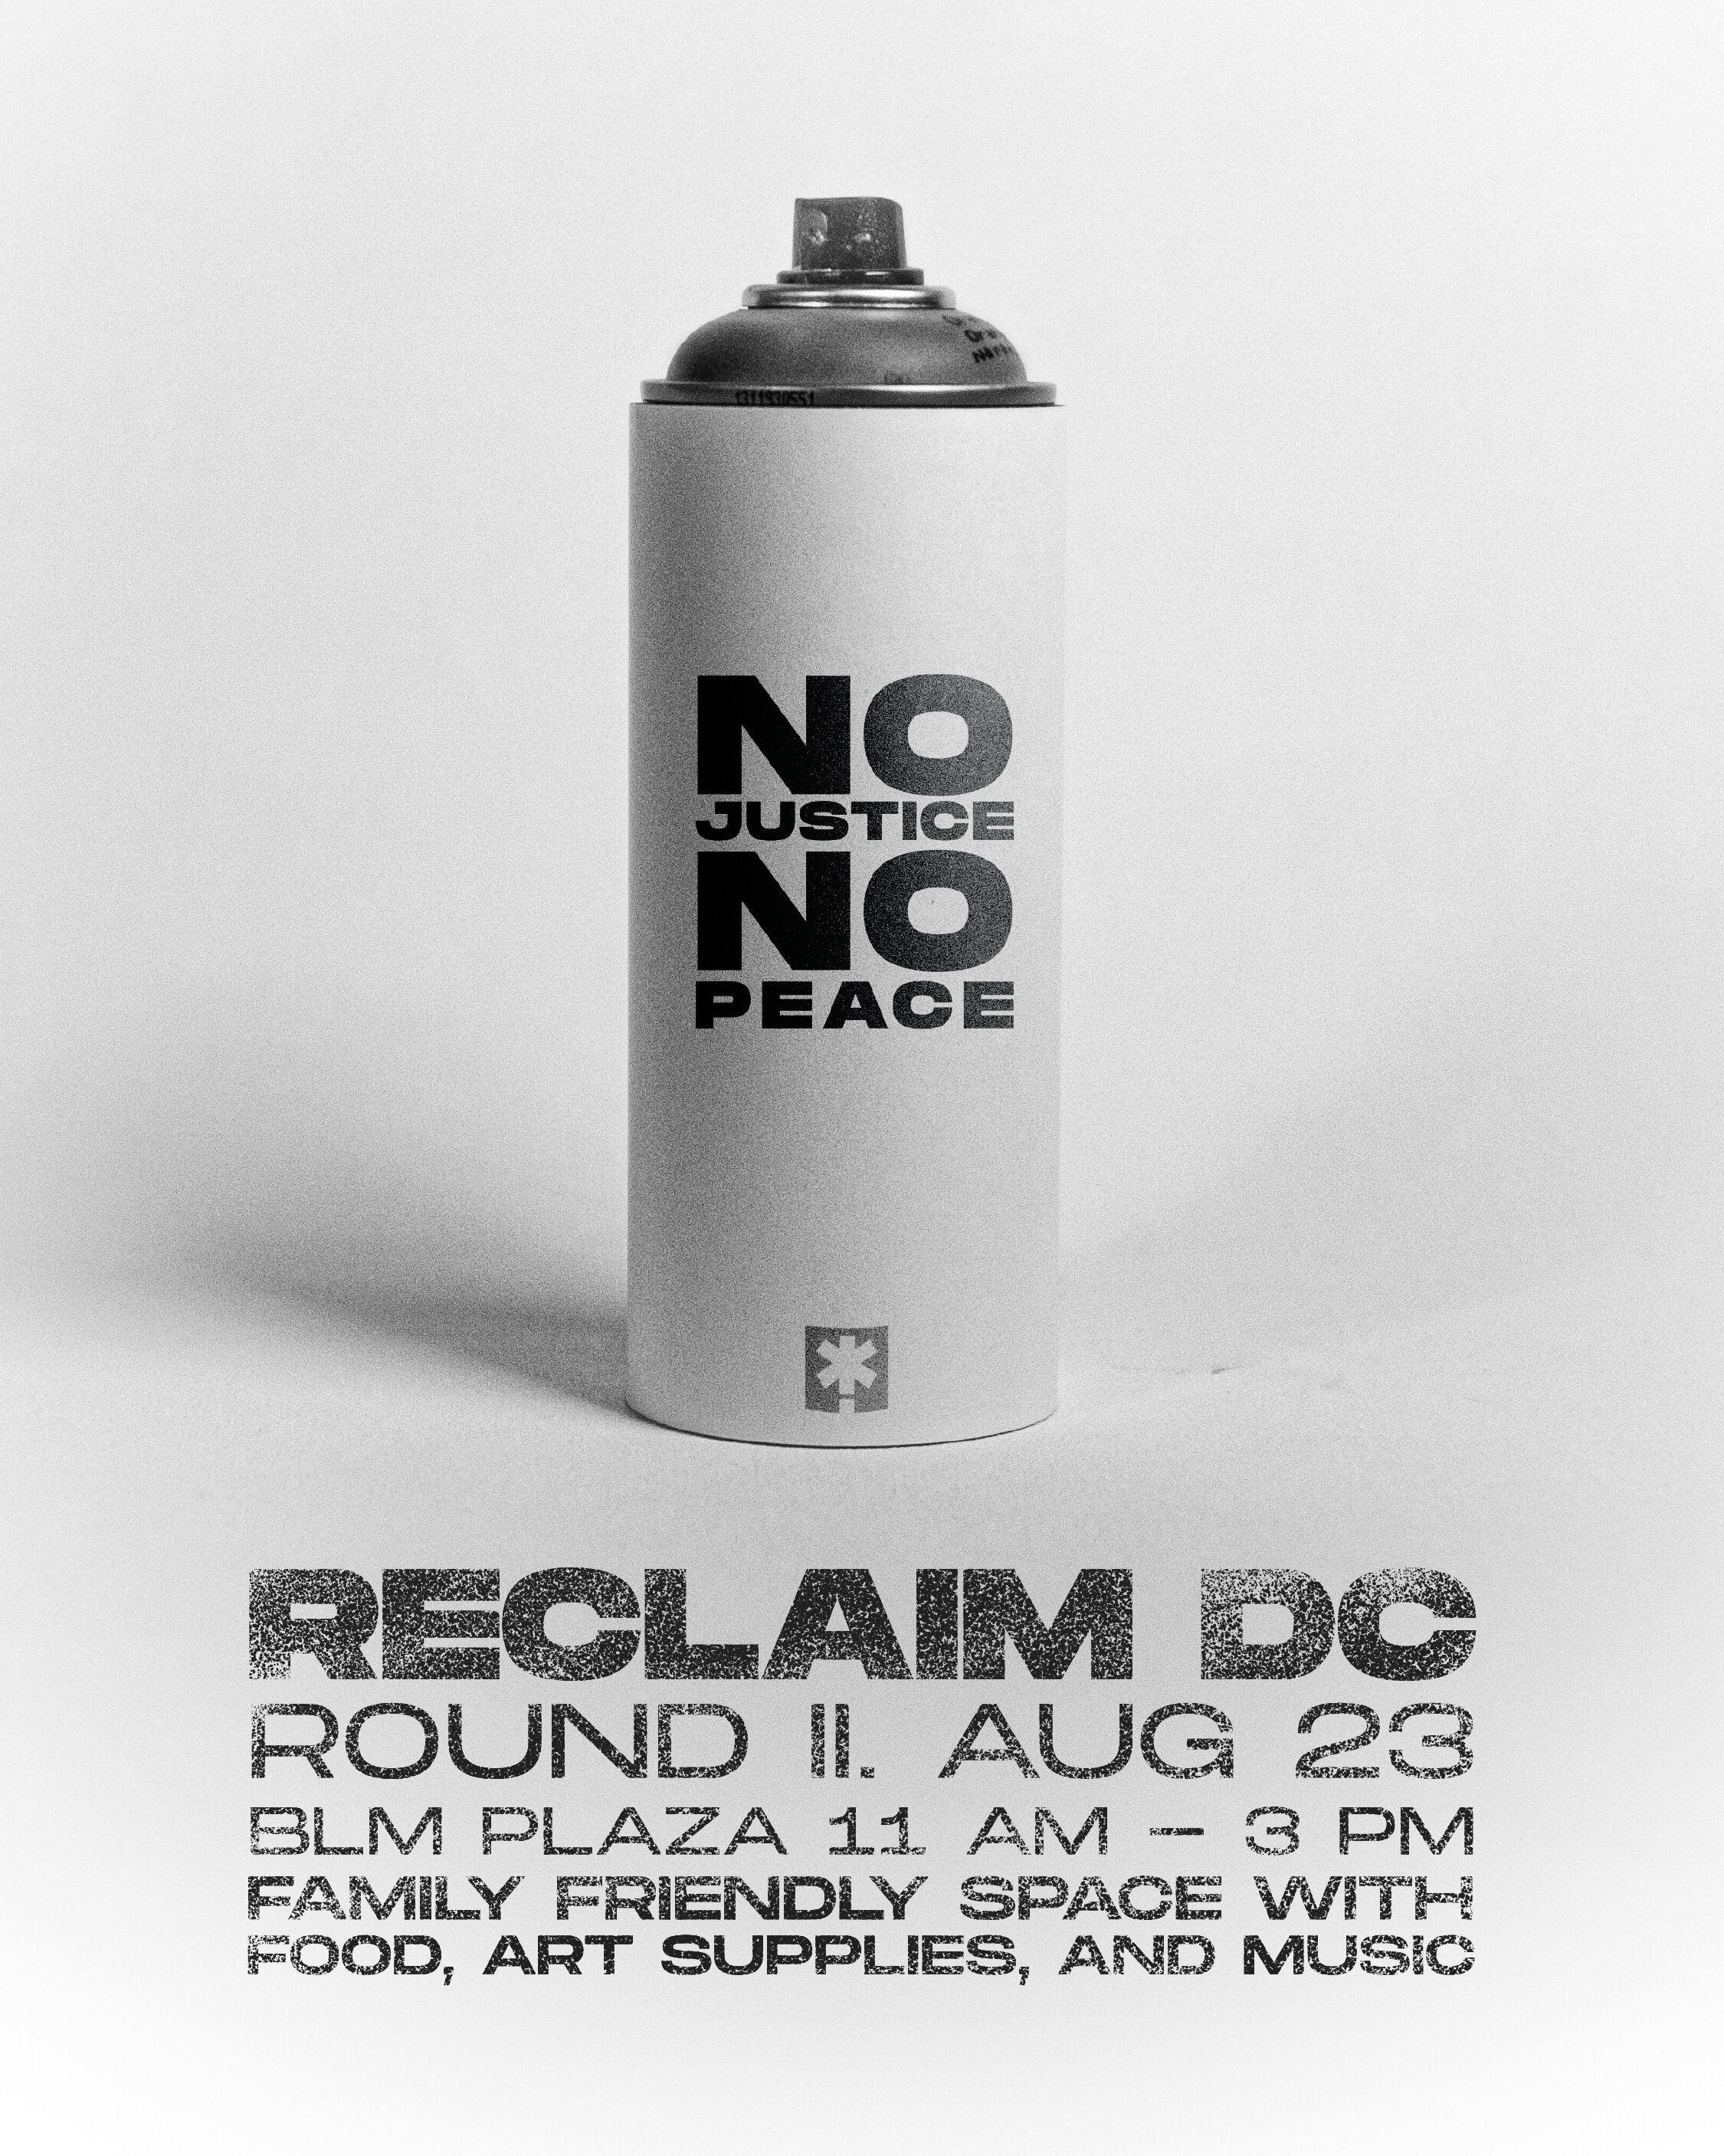 Flyer for Reclaim DC event featuring a photograph of a spray can with the words “No Justice, No Peace” on it. White background.